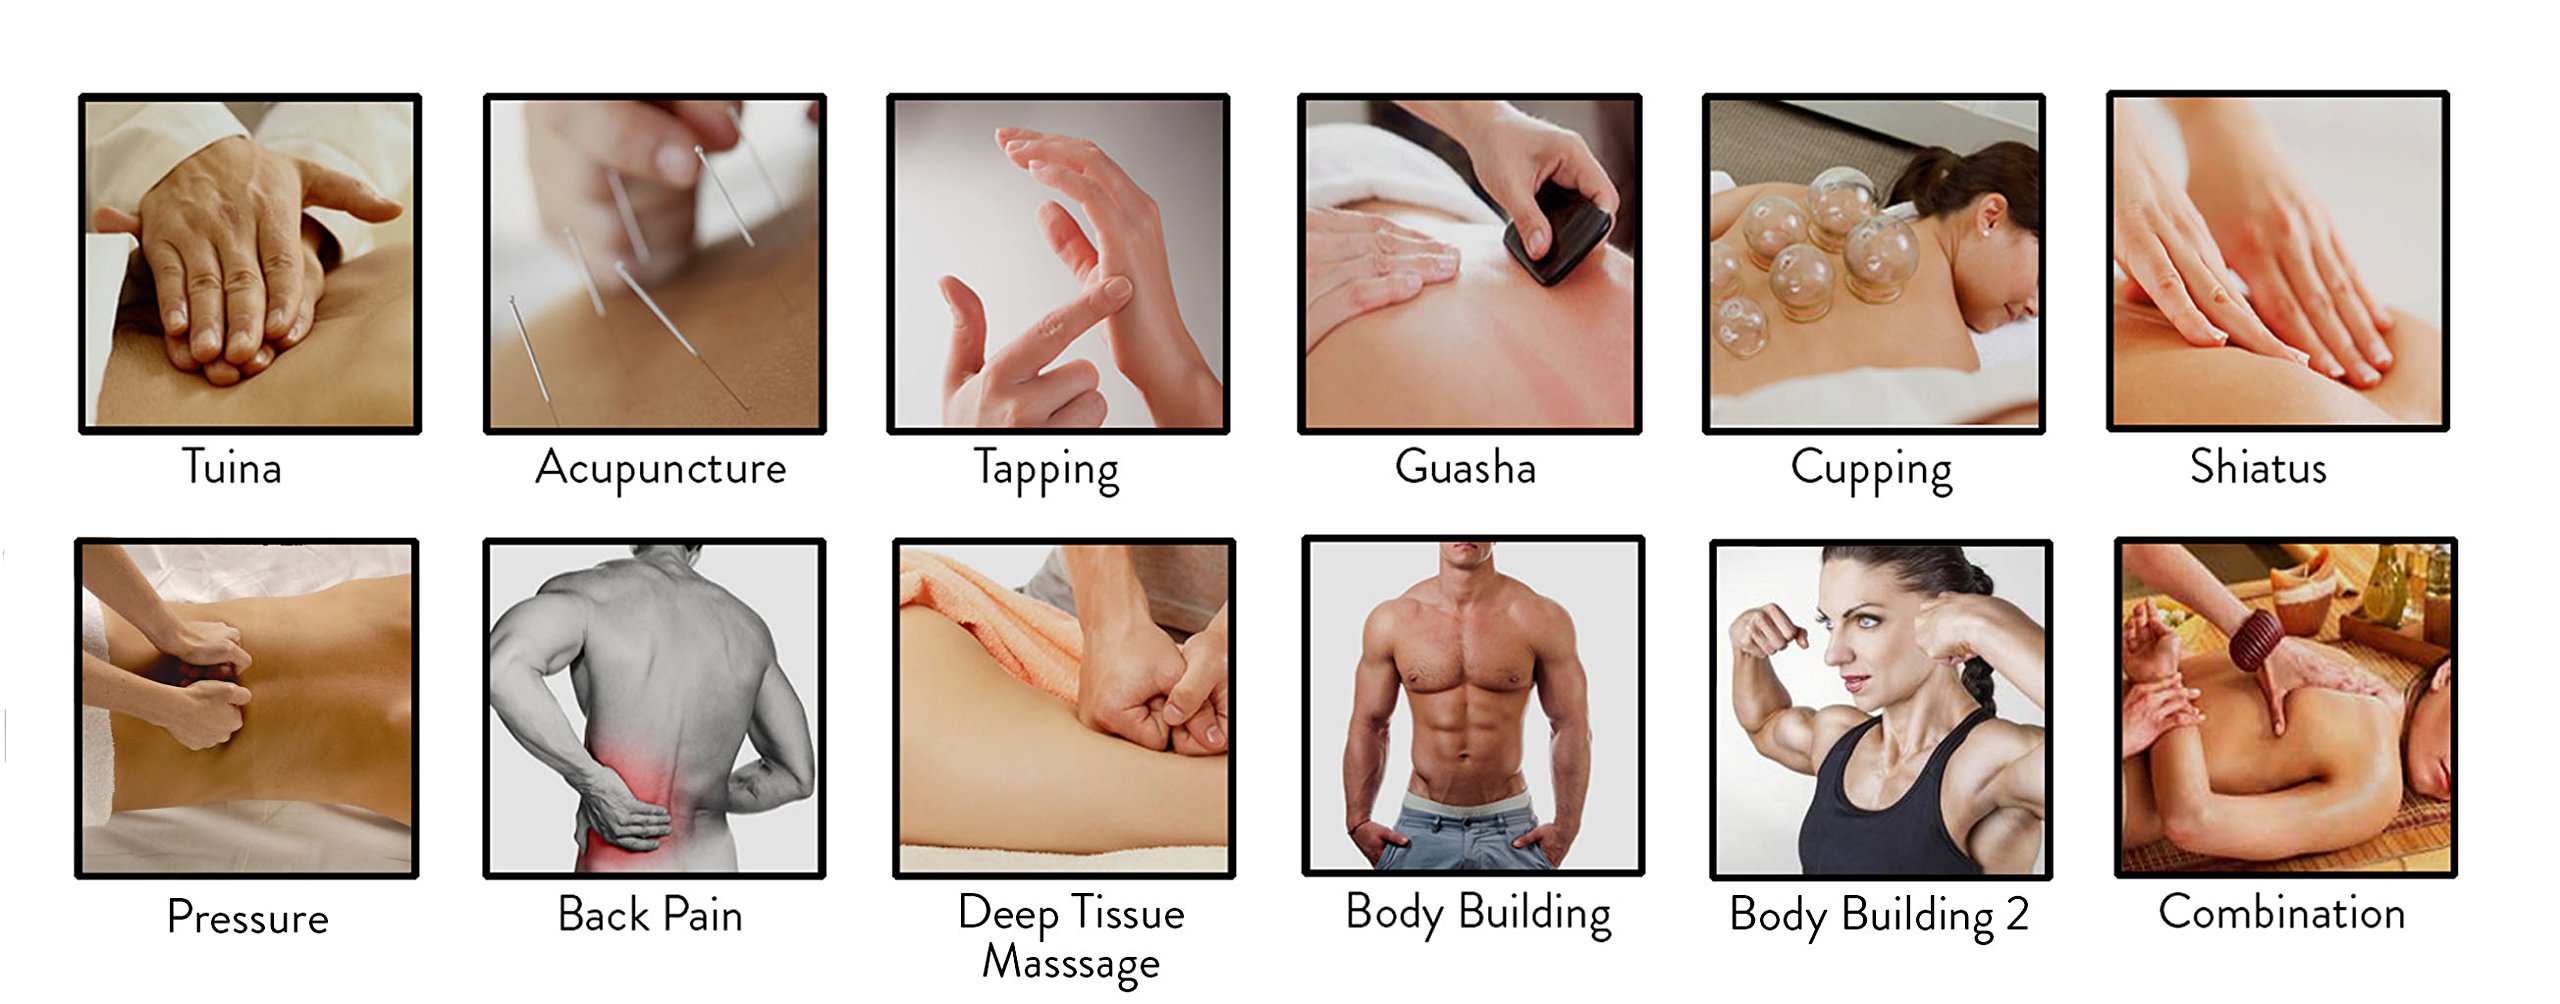 massage modes demonstrated to explain what they mean